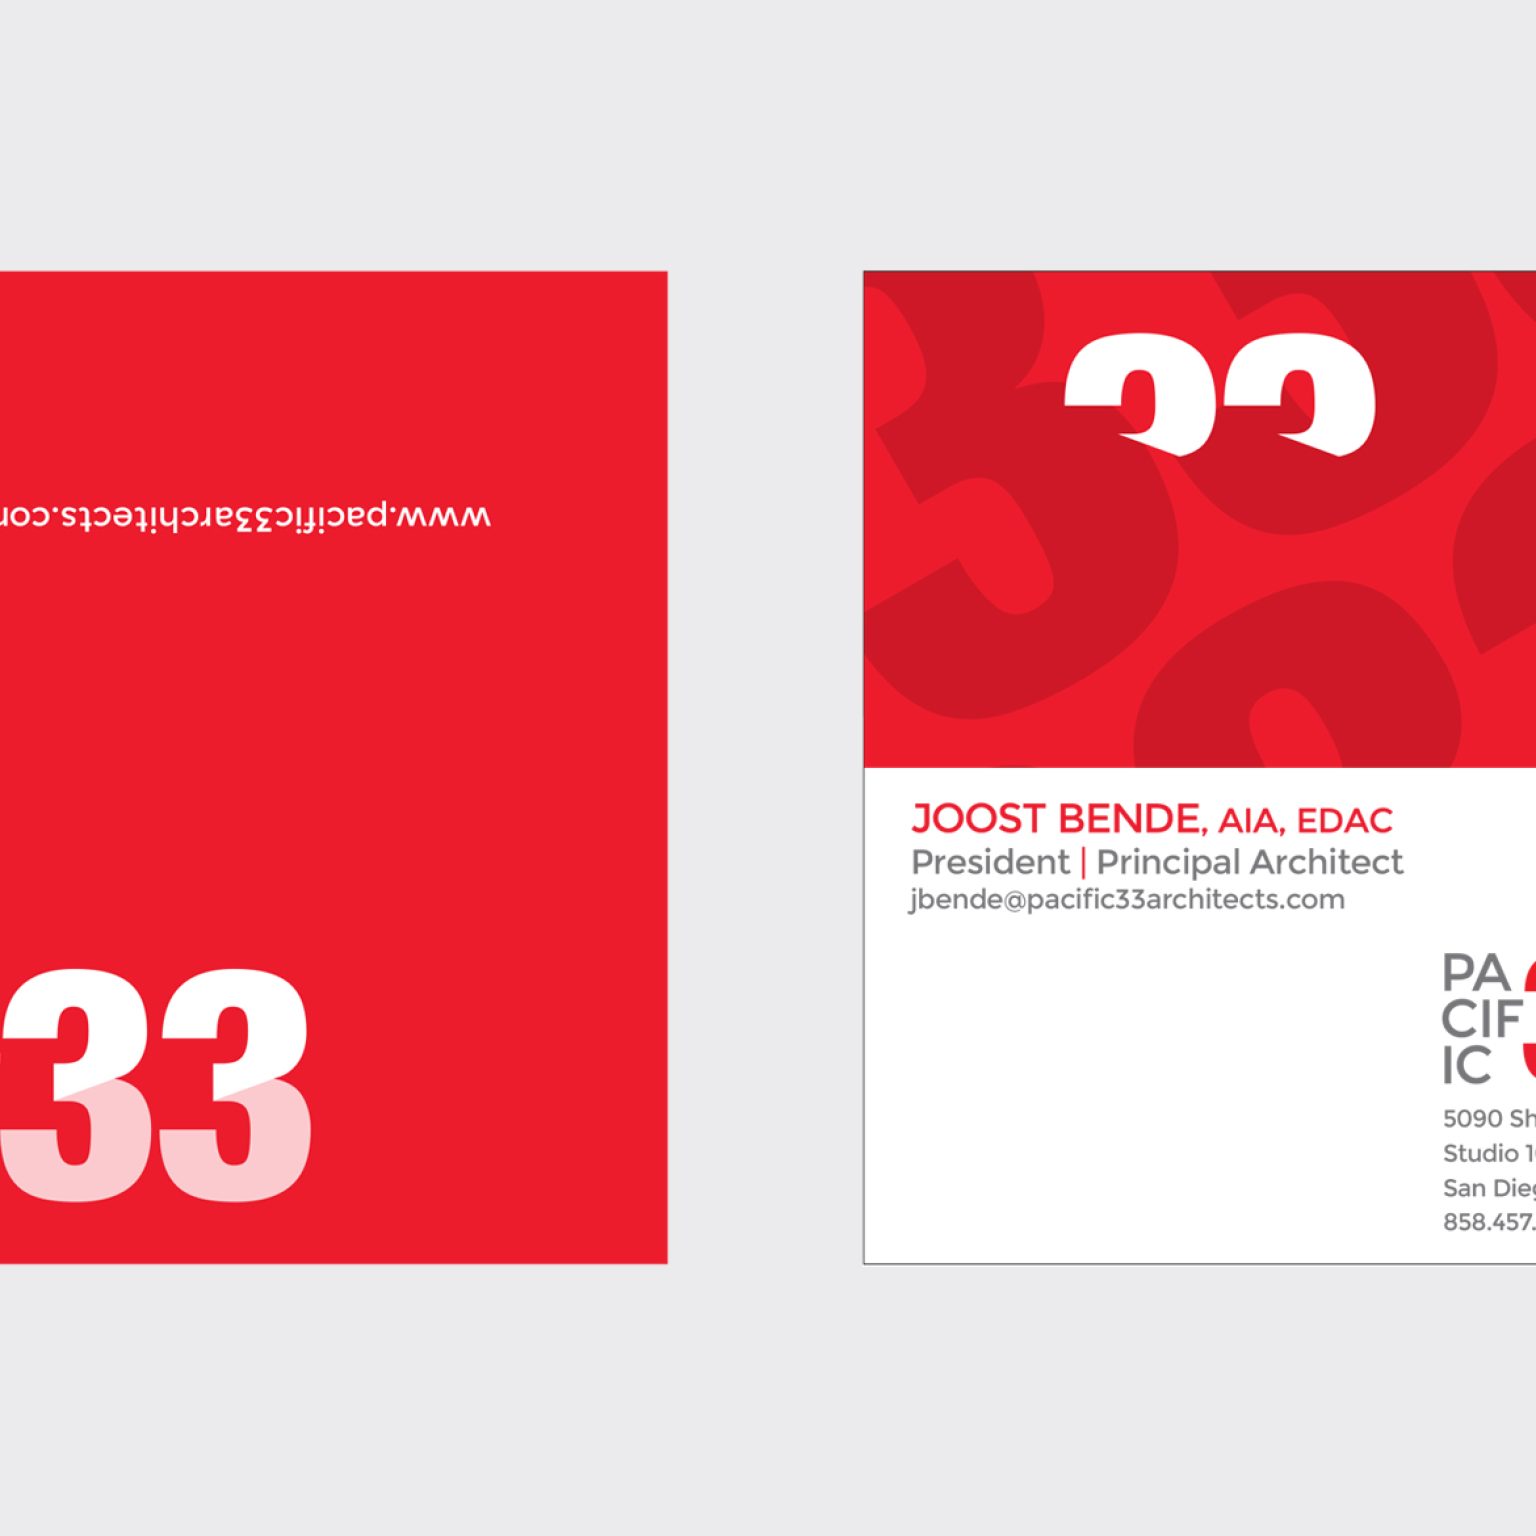 Business card design for Pacific 33